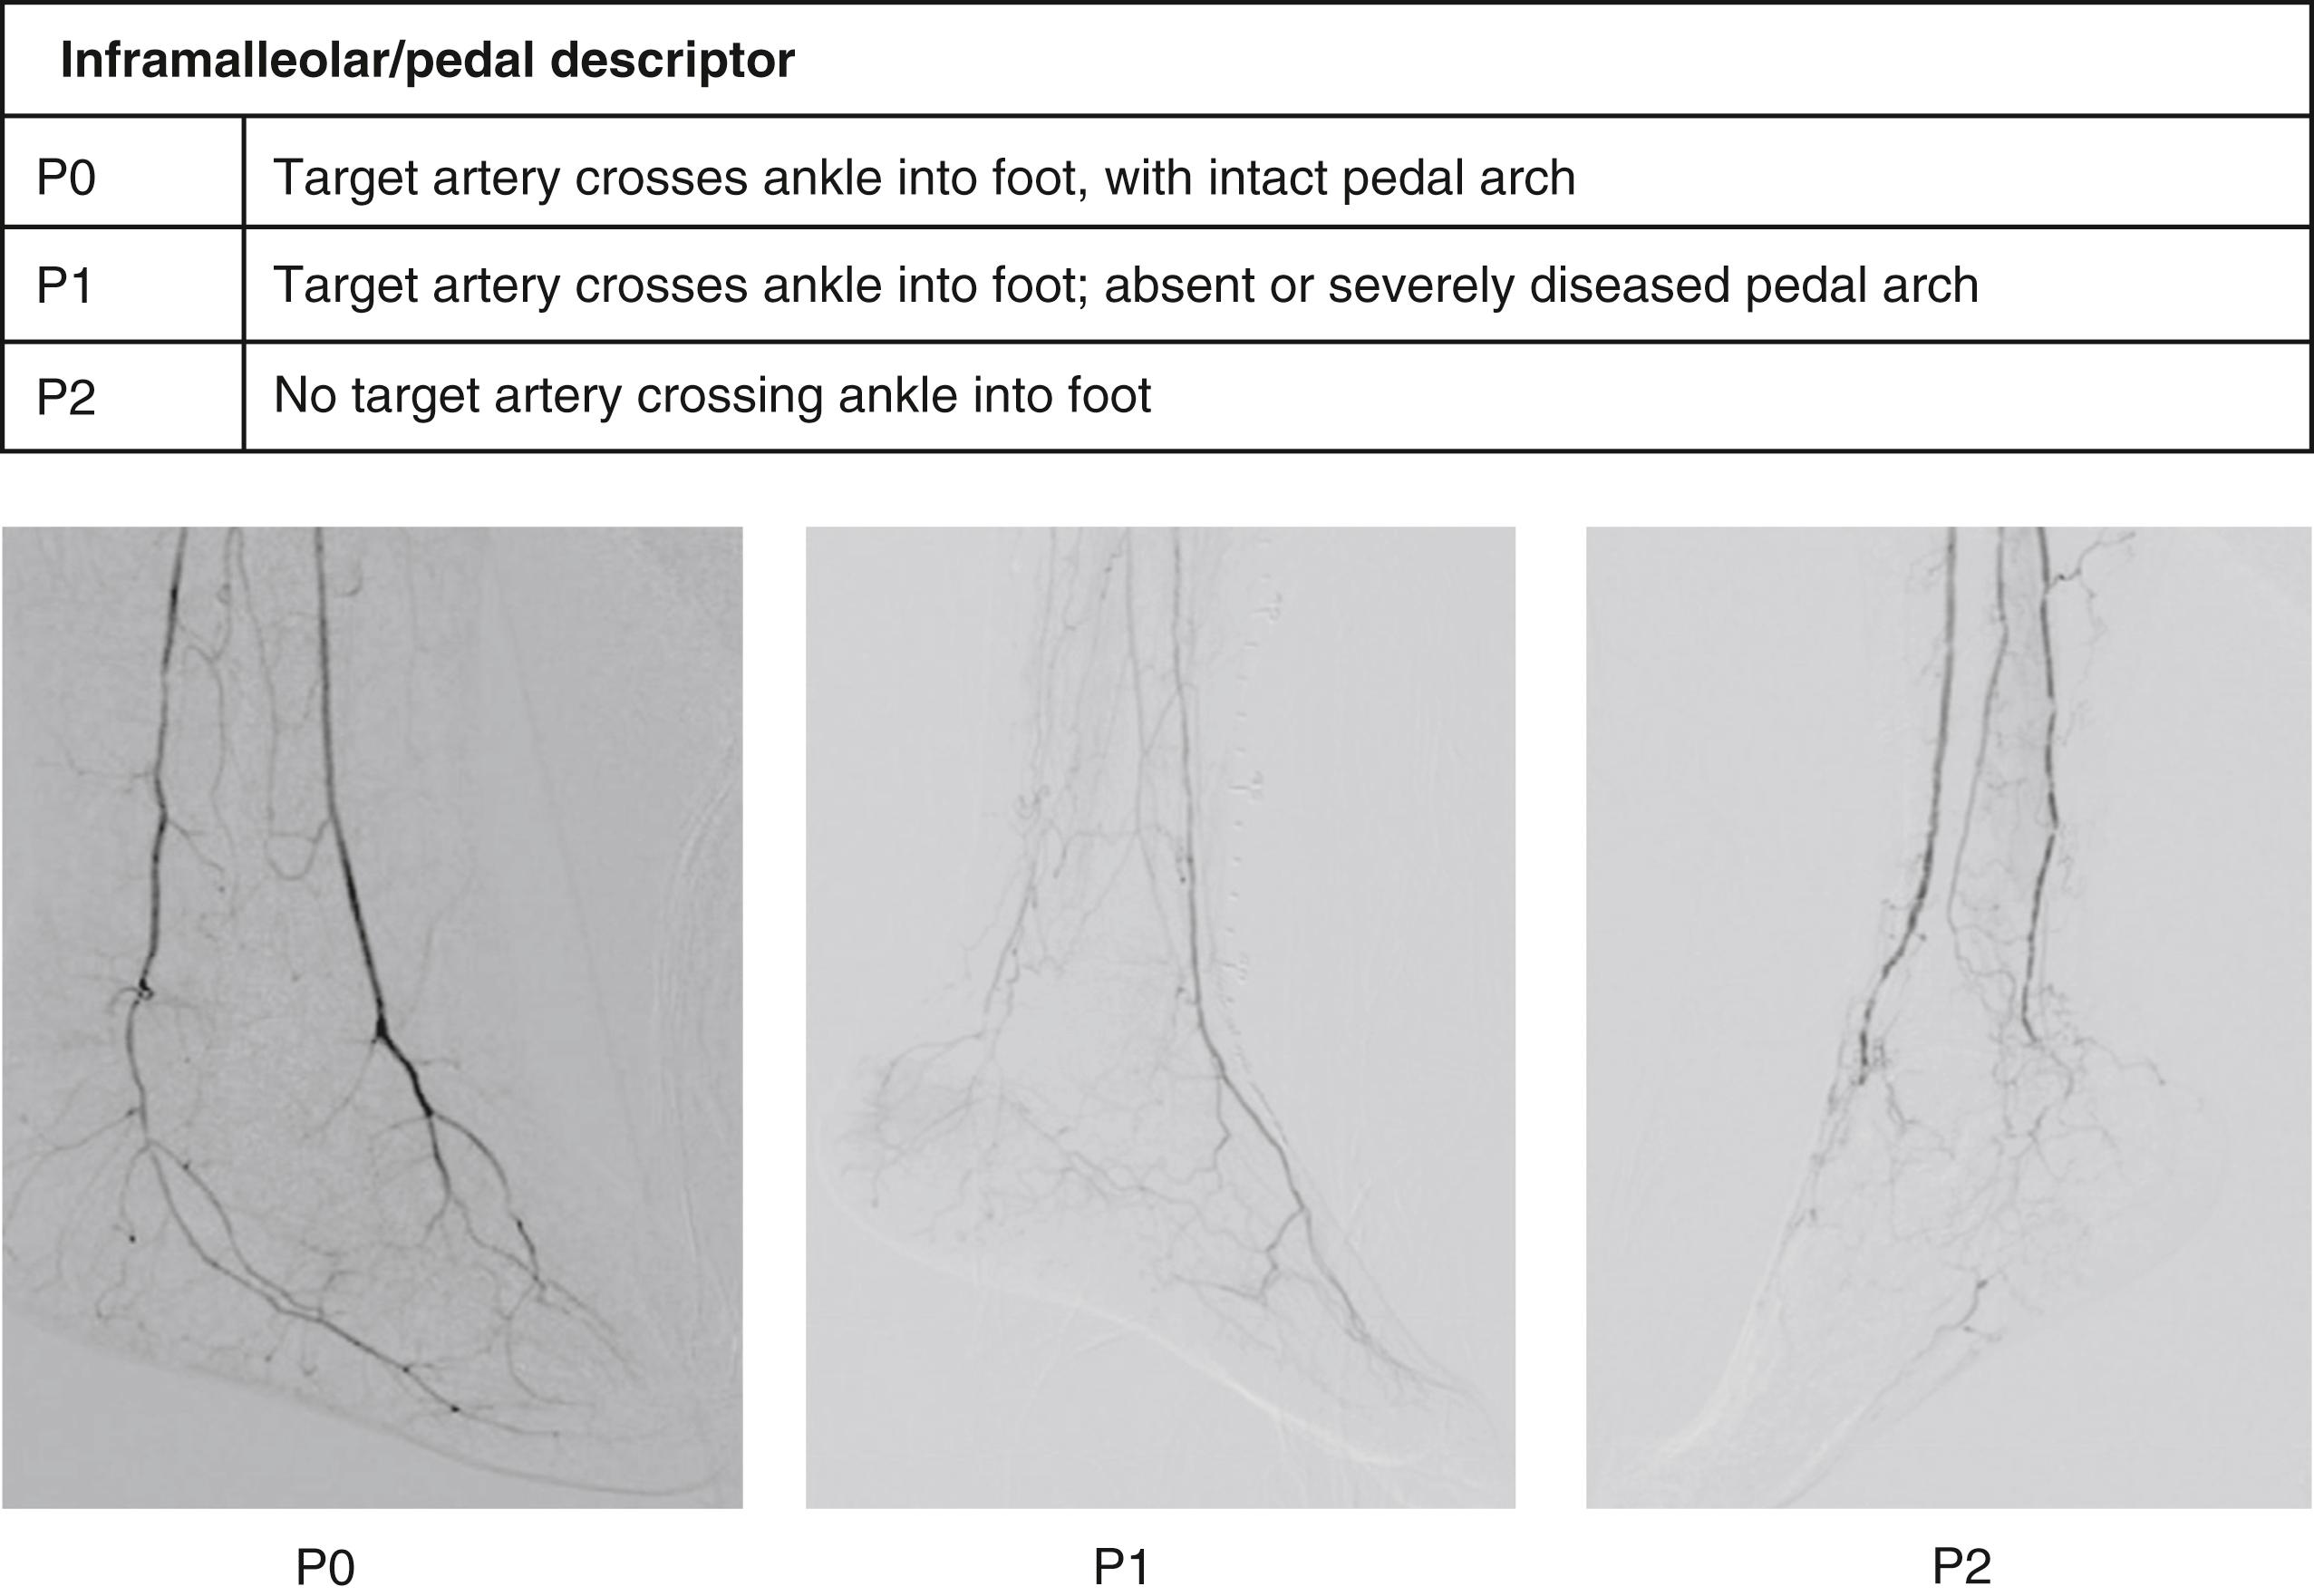 Fig. 63.9, Inframalleolar (IM)/pedal disease descriptor in Global Limb Anatomic Staging System (GLASS). Representative angiograms of P0 (left), P1 (middle), and P2 (right) patterns of disease.